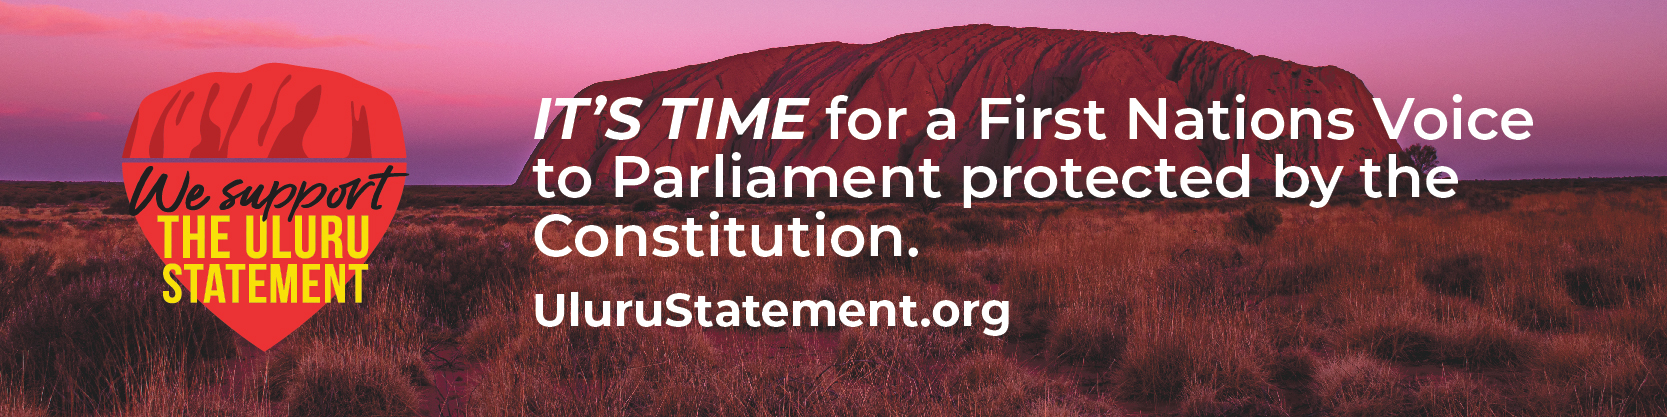 We support the Uluru Statement. IT'S TIME for a First Nations Voice to Parliament protected by the Constitution. 